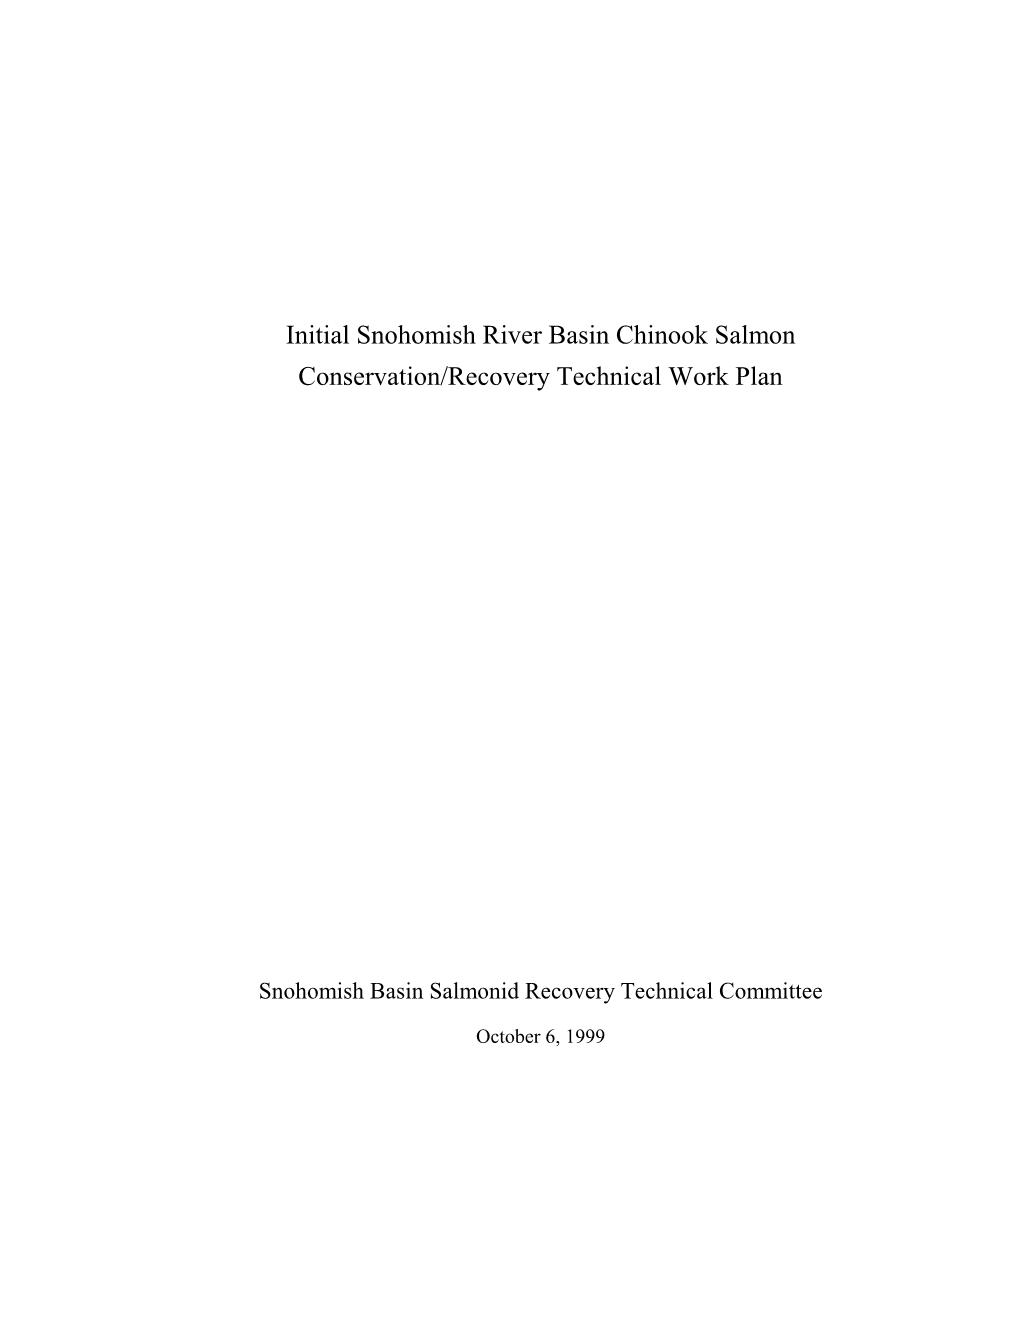 Initial Snohomish River Basin Chinook Salmon Conservation/Recovery Technical Work Plan